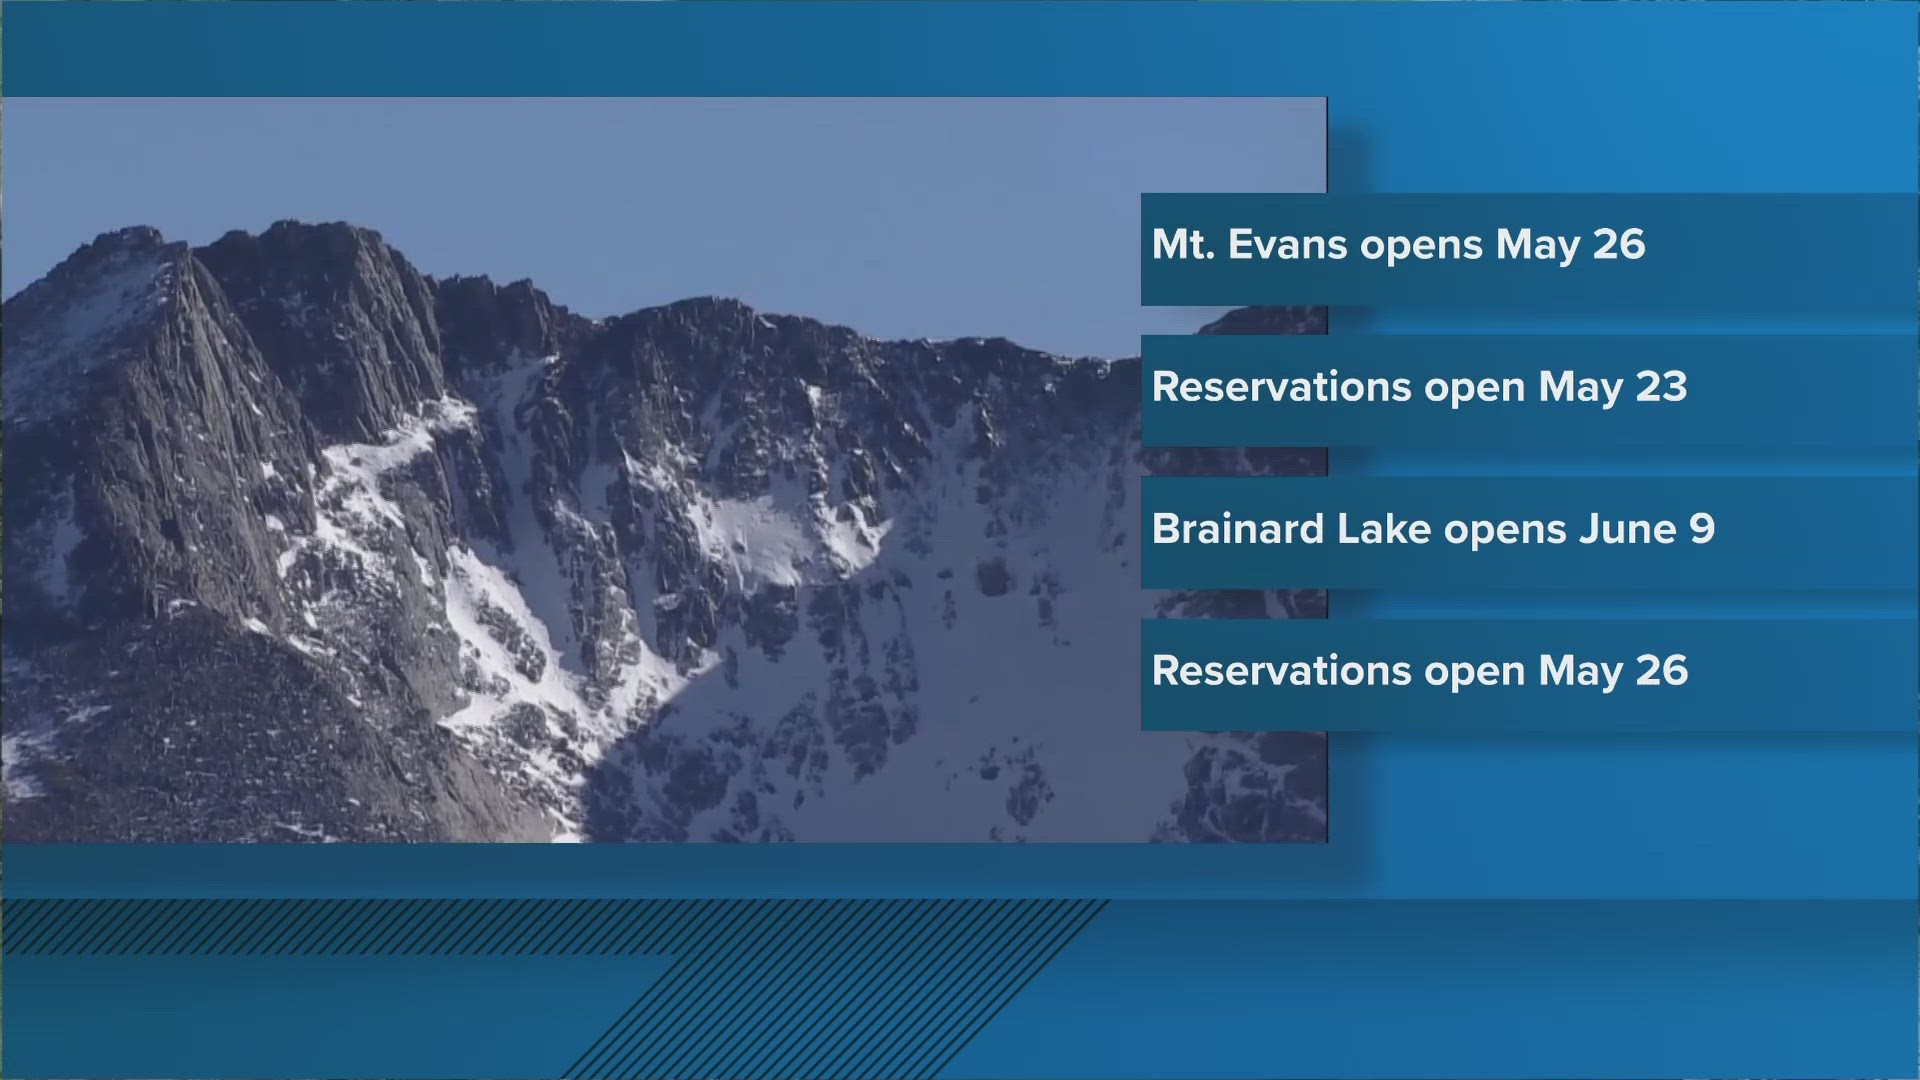 Two popular places to visit in the mountains will reopen soon.